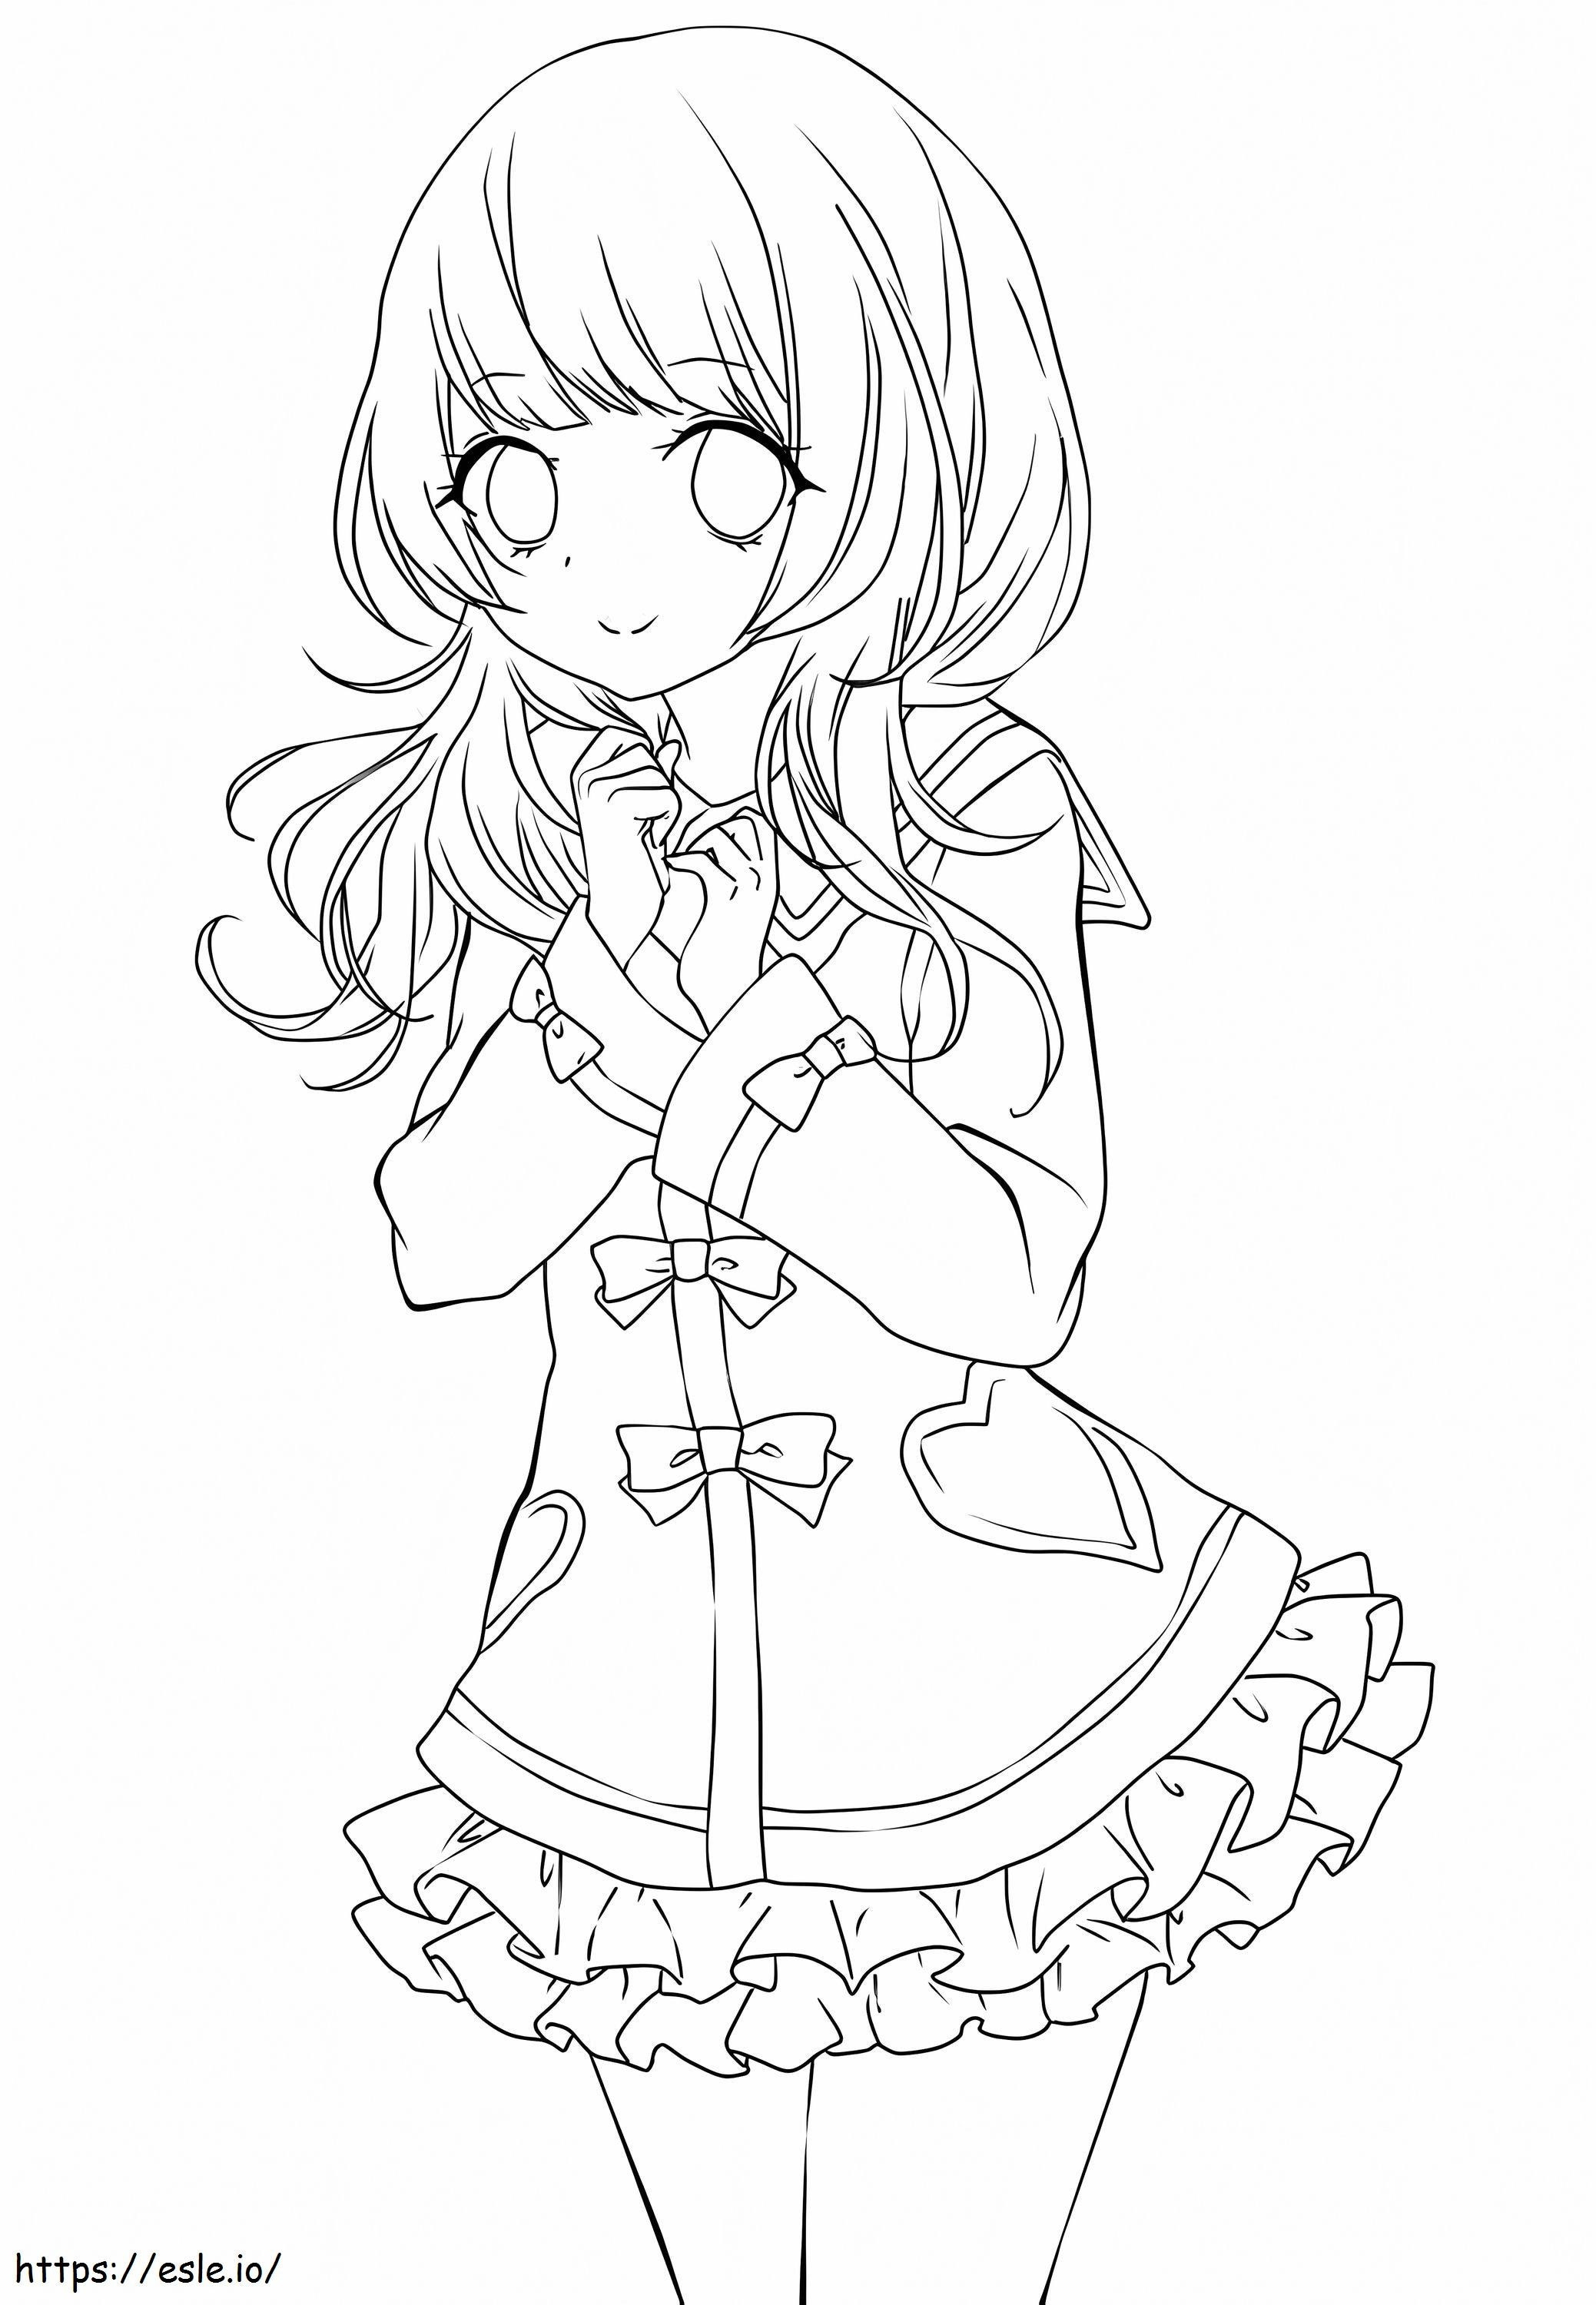 Cute Anime Girl A4 coloring page